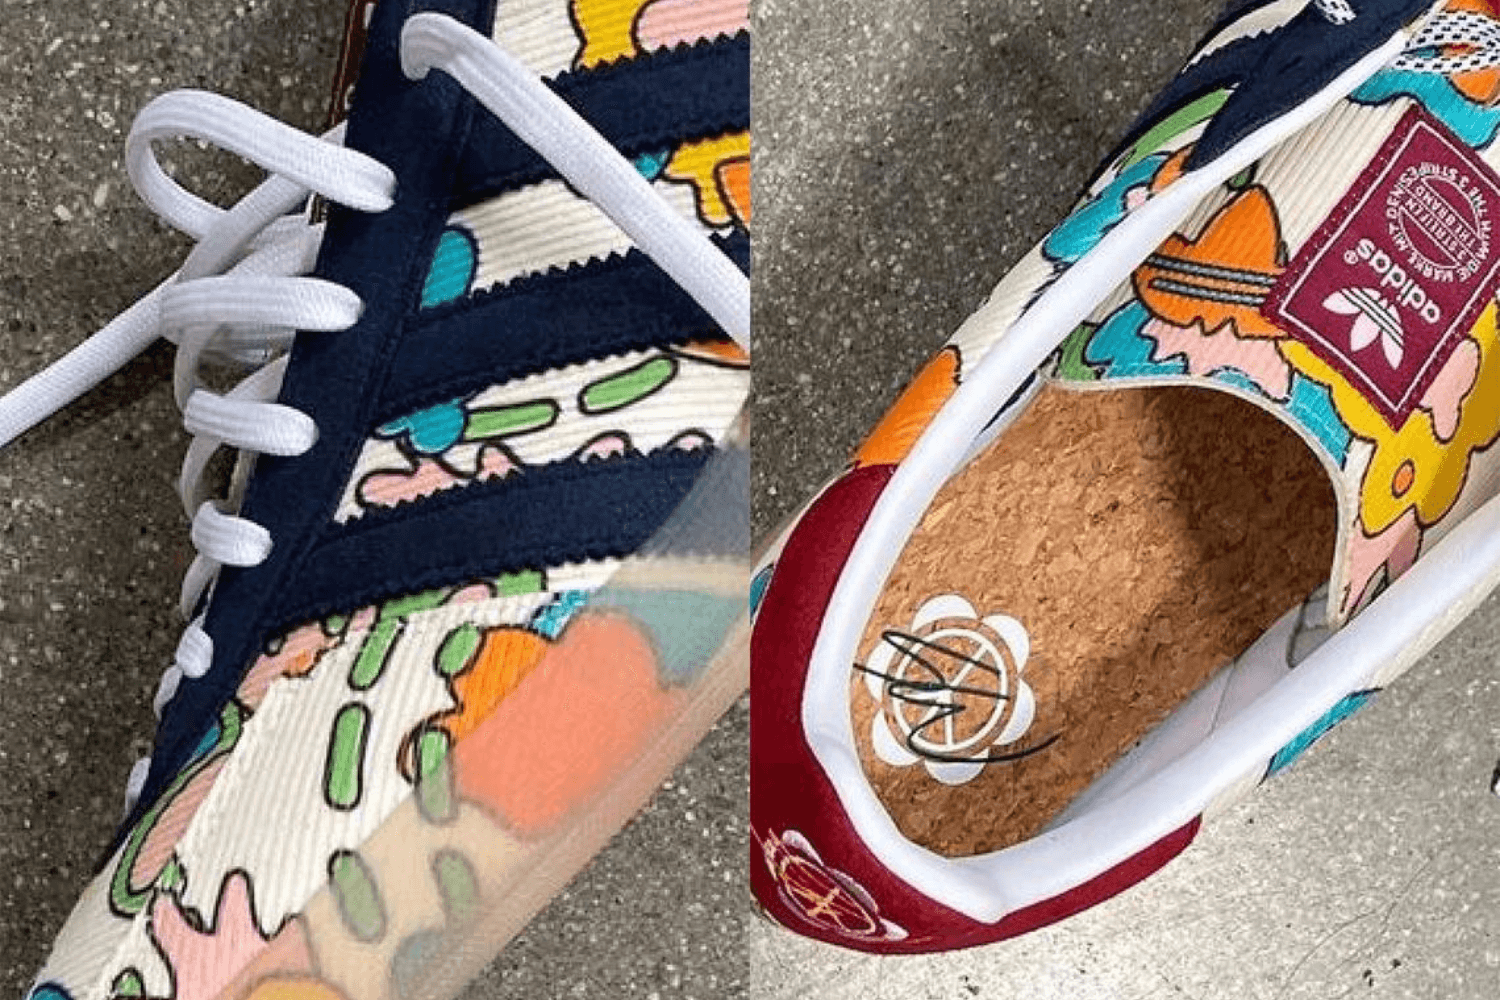 Teaser of the Sean Wotherspoon x adidas Gazelle